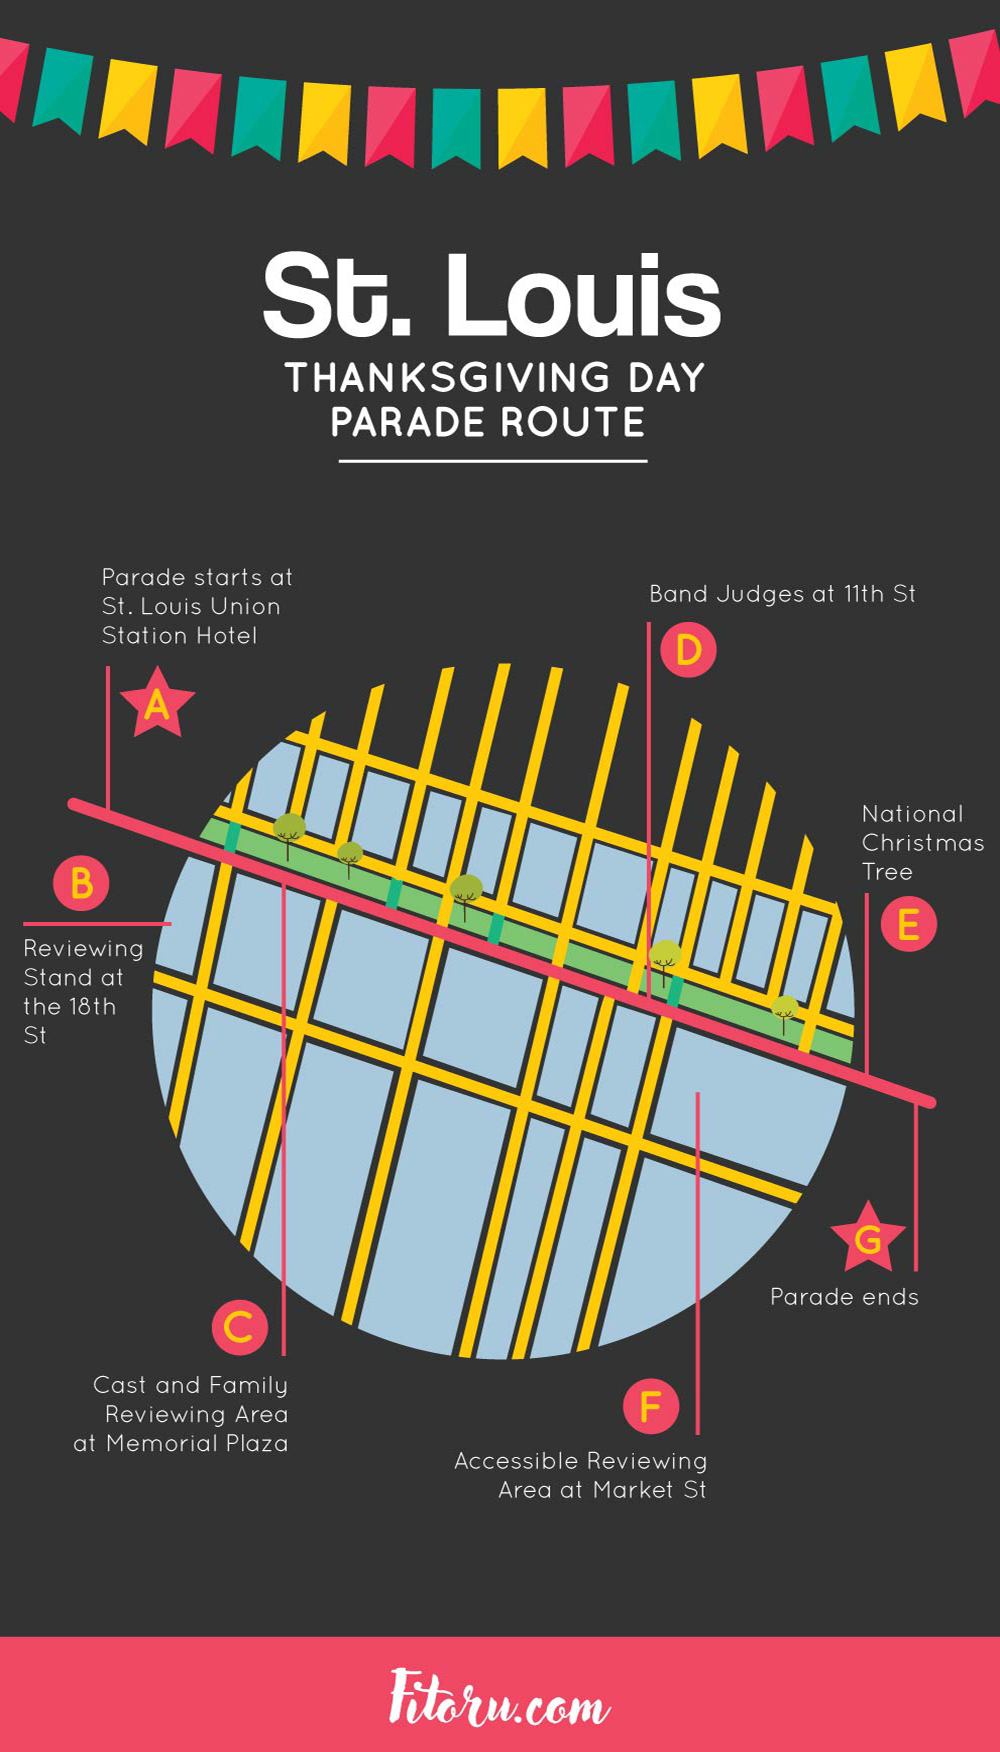 Here is a map of the St. Louis Thanksgiving Day parade route.